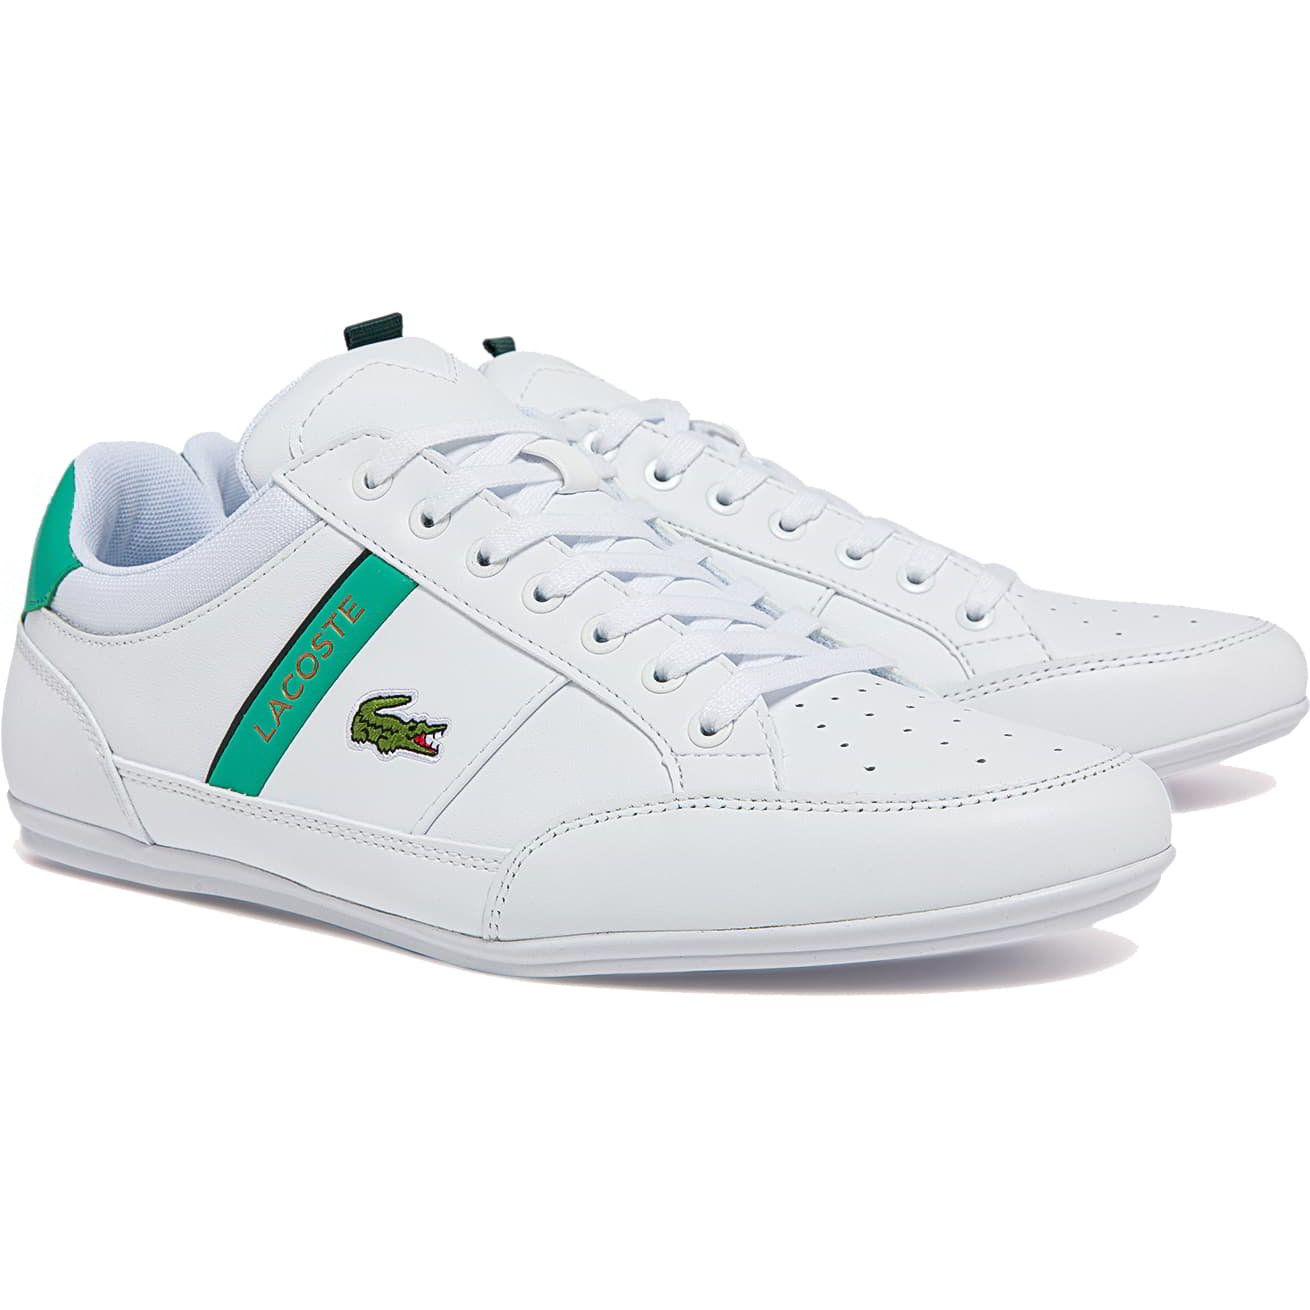 Lacoste Mens Chaymon 722-1 Leather Trainers - UK 10 White 2951